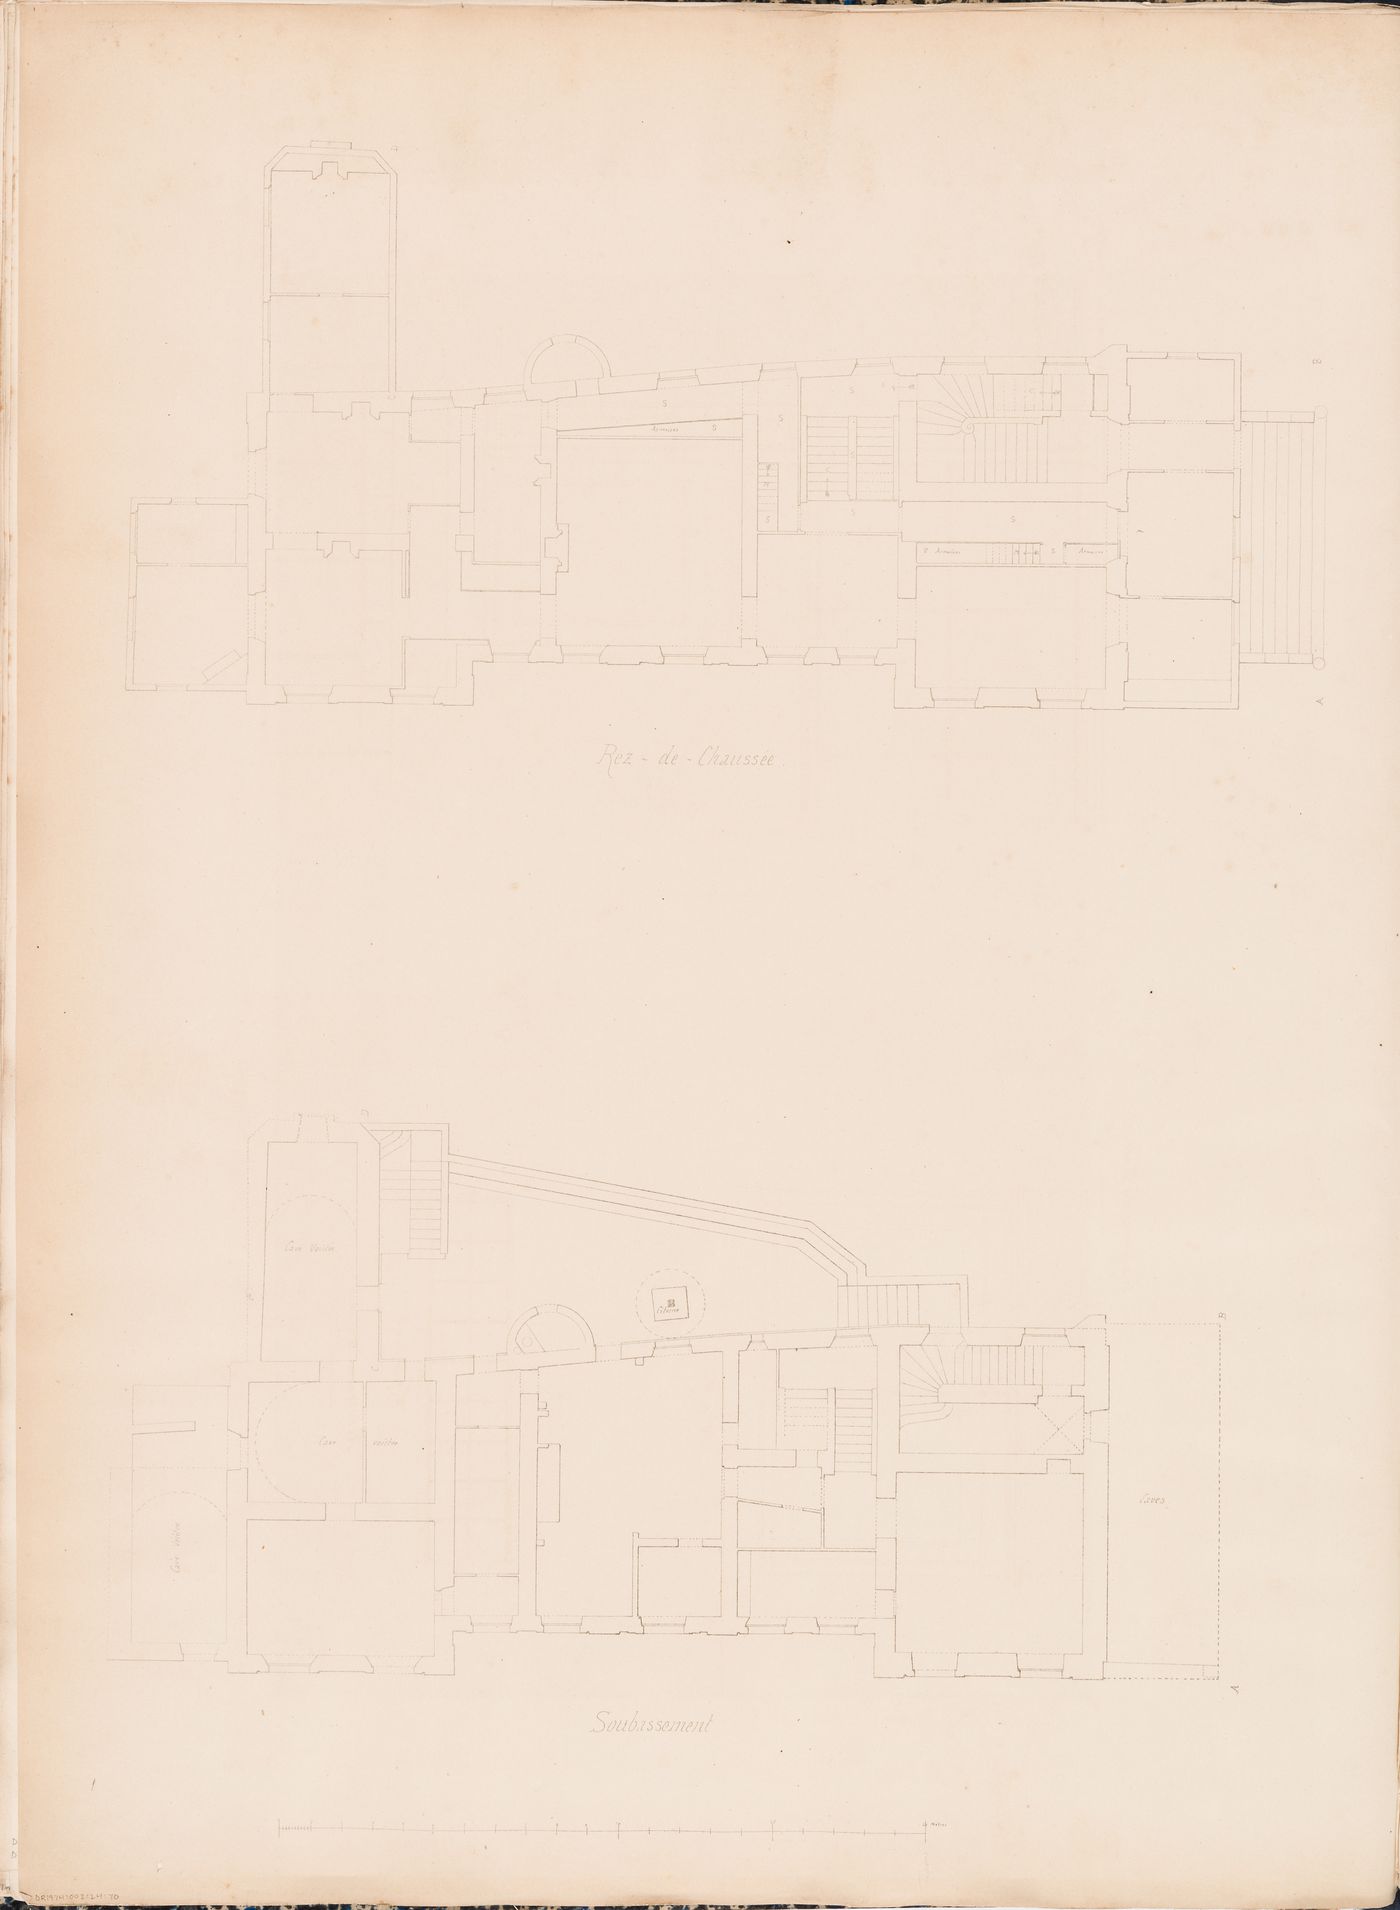 Plan for the "soubassement" and ground floor for an unidentifed building